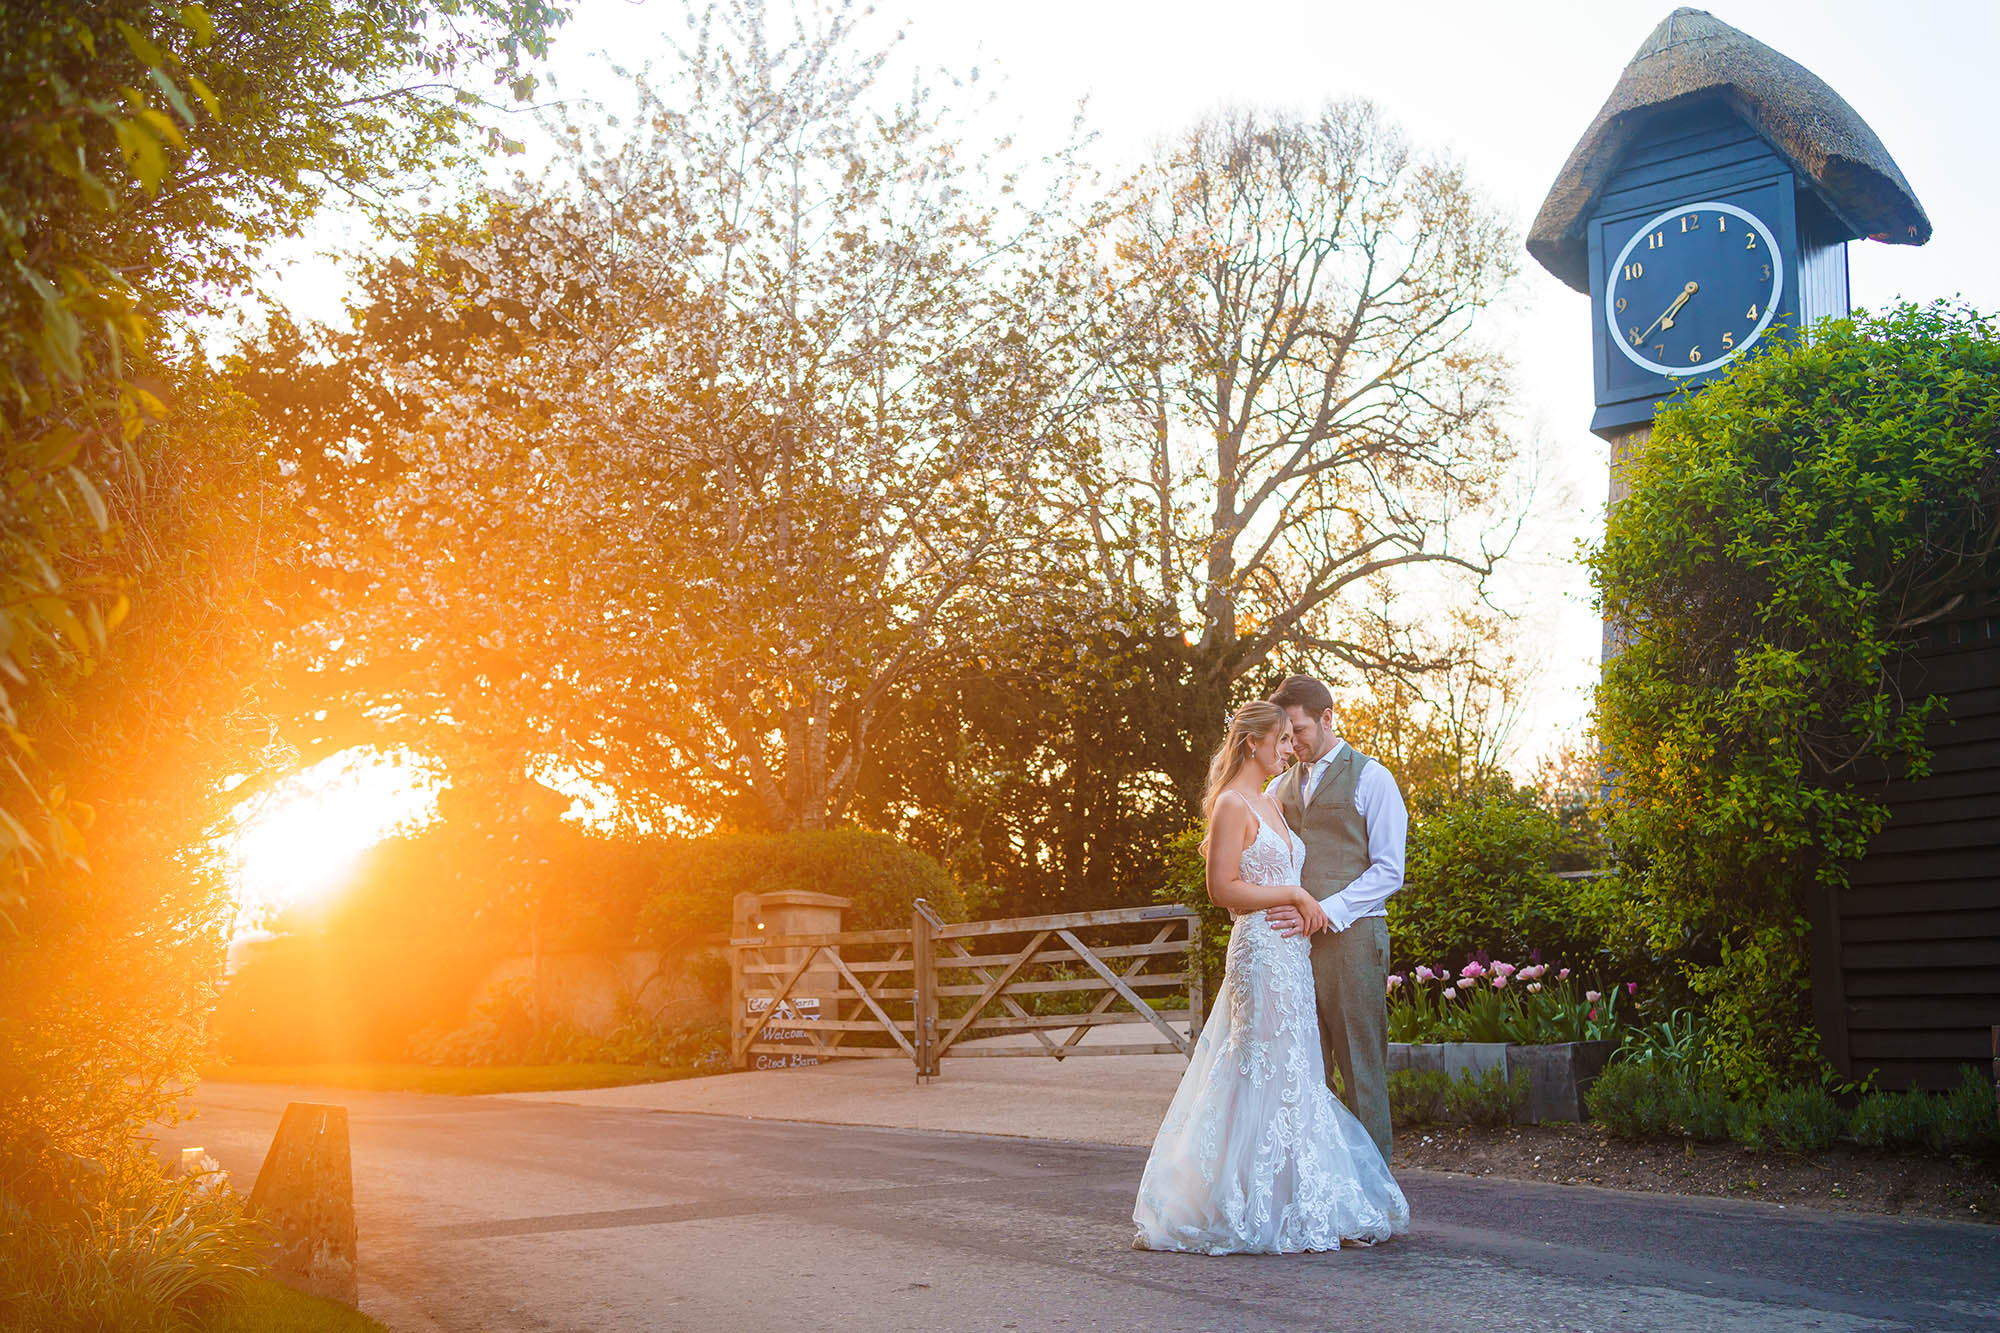 A bride and groom stand beside a clock tower as the sun sets. Image by Daniel Thomas Photography